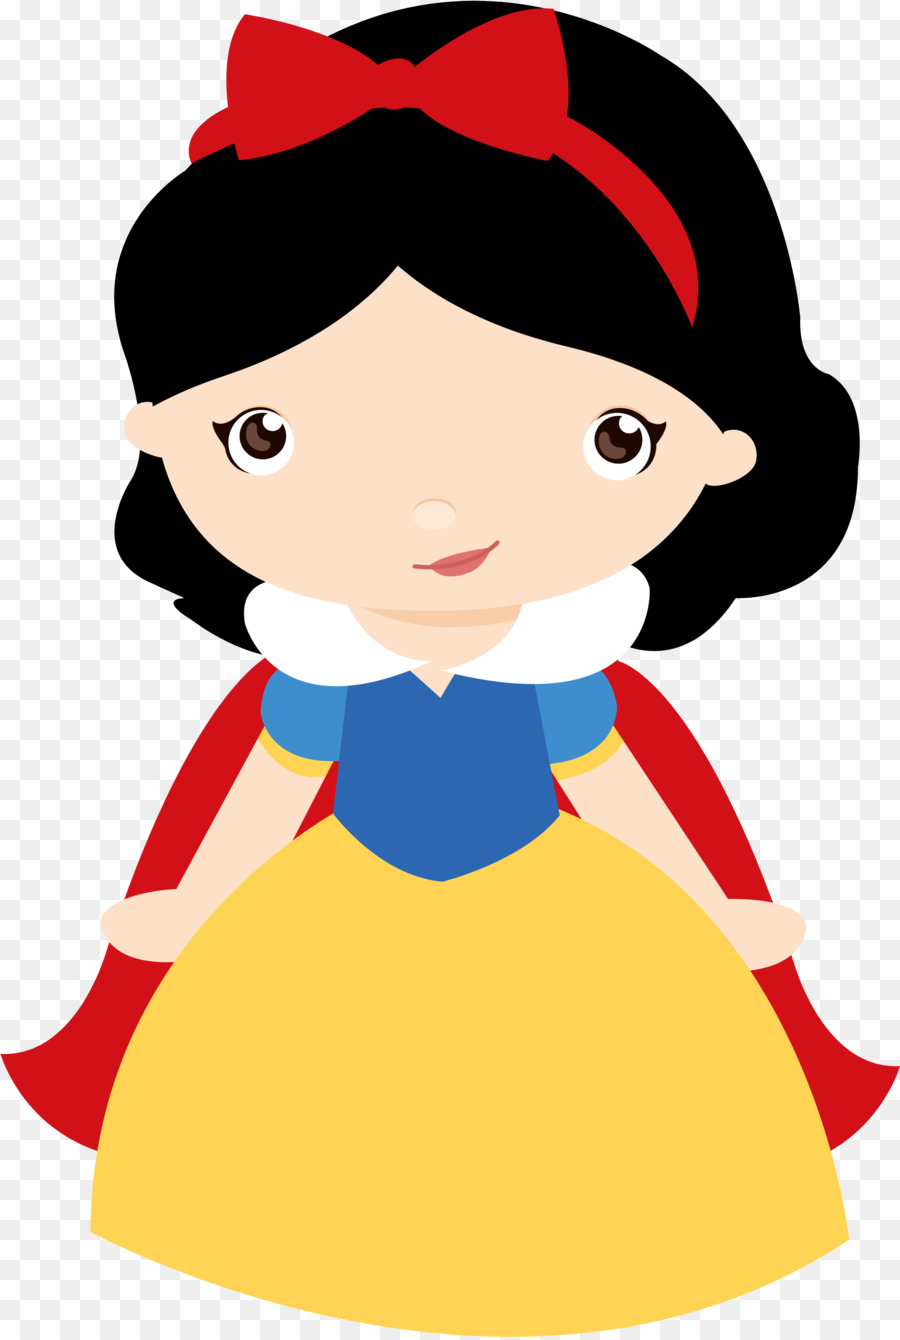 Mickey Mouse Disney Princess Portable Network Graphics Snow White Clip art - june png download png download - 1841*2734 - Free Transparent Mickey Mouse png Download.